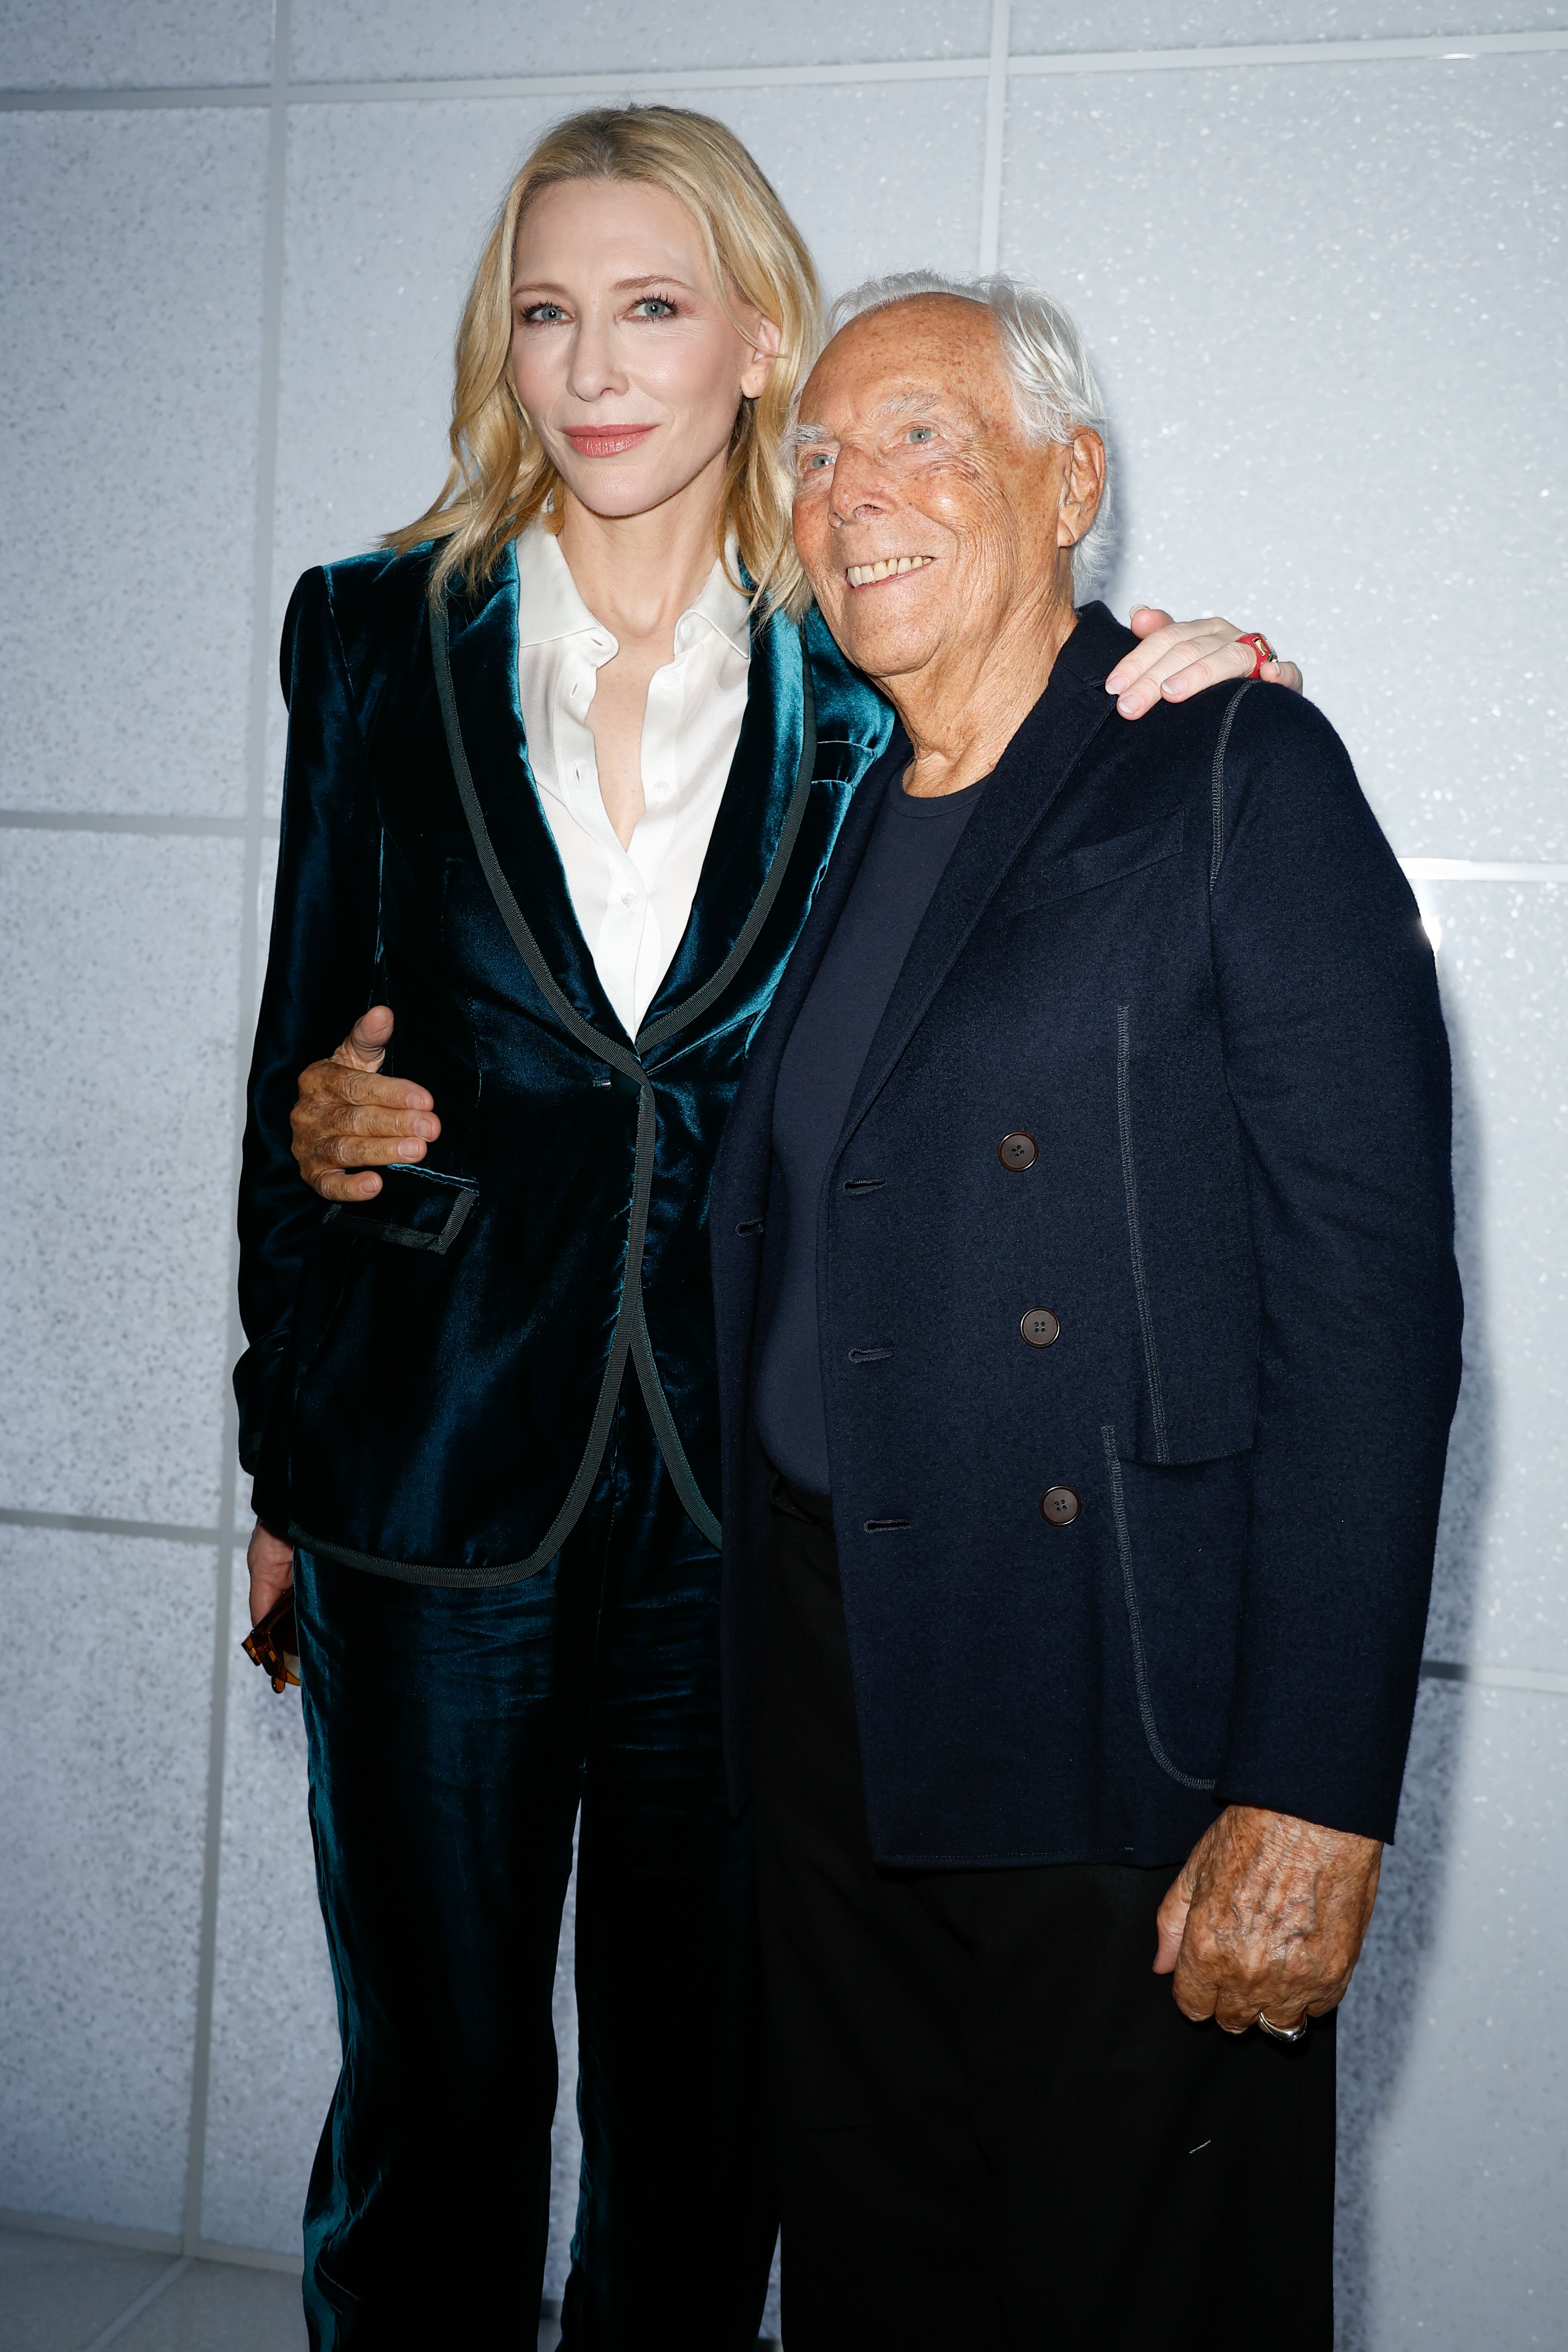 Cate Blanchett and Giorgio Armani at the latter's Milan catwalk show.